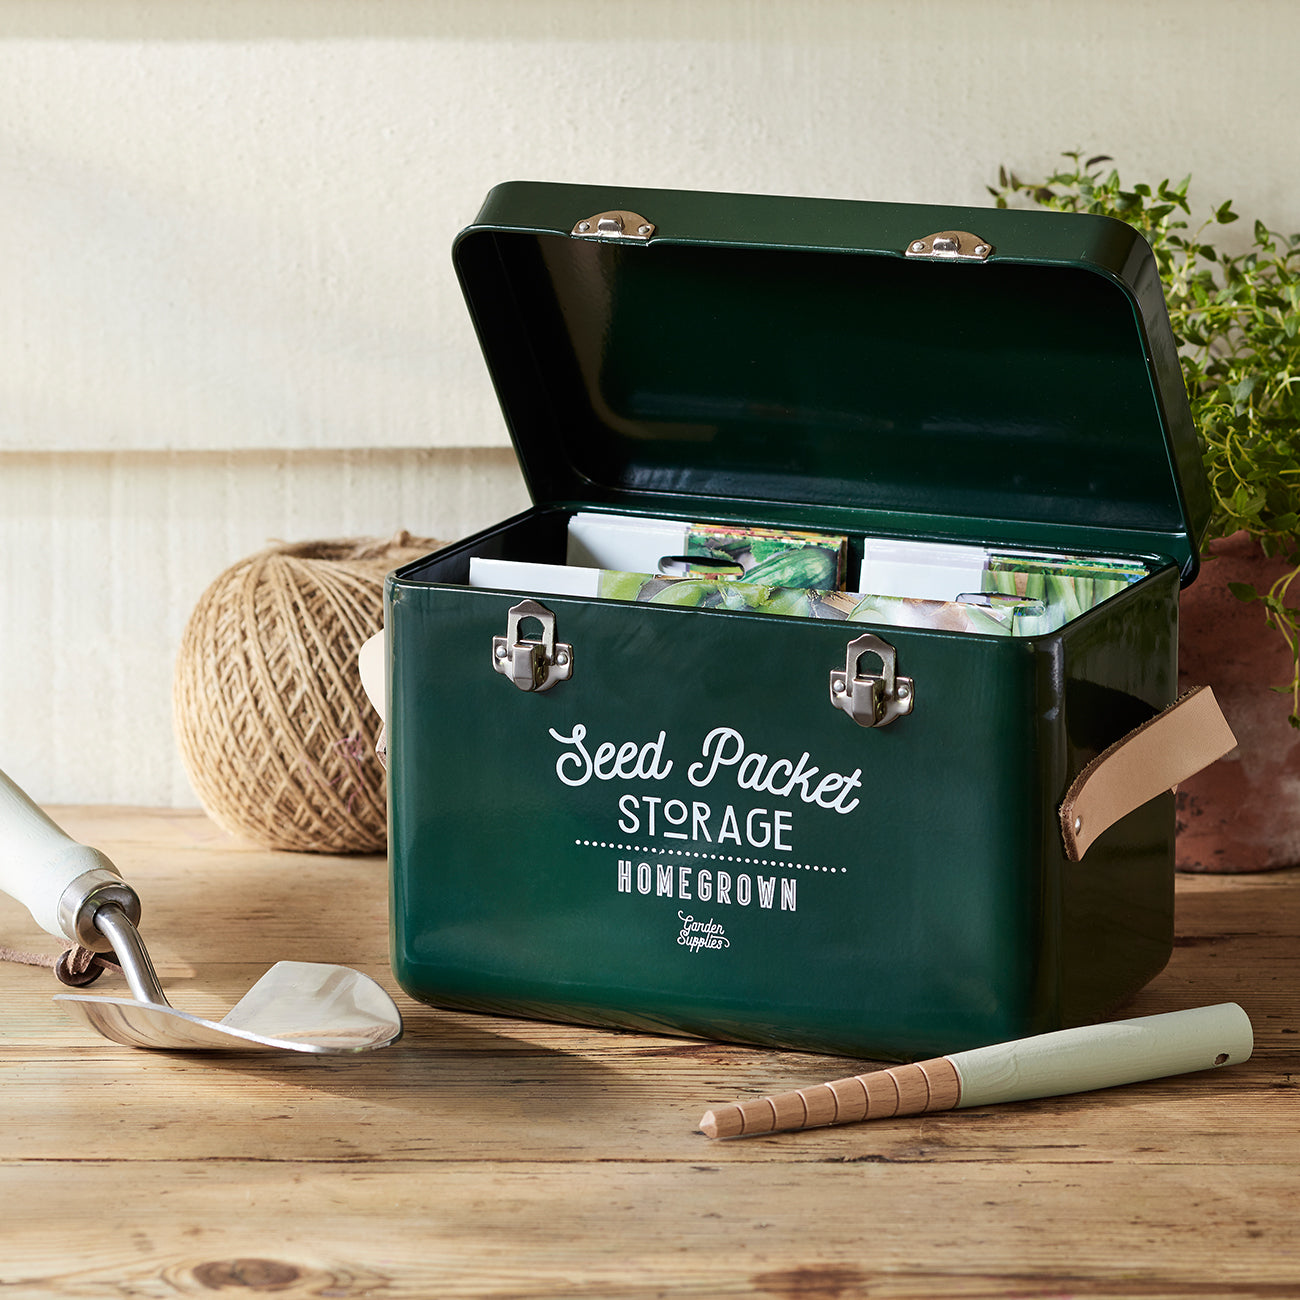 Perfect for collecting, storing and organising your seed packets.